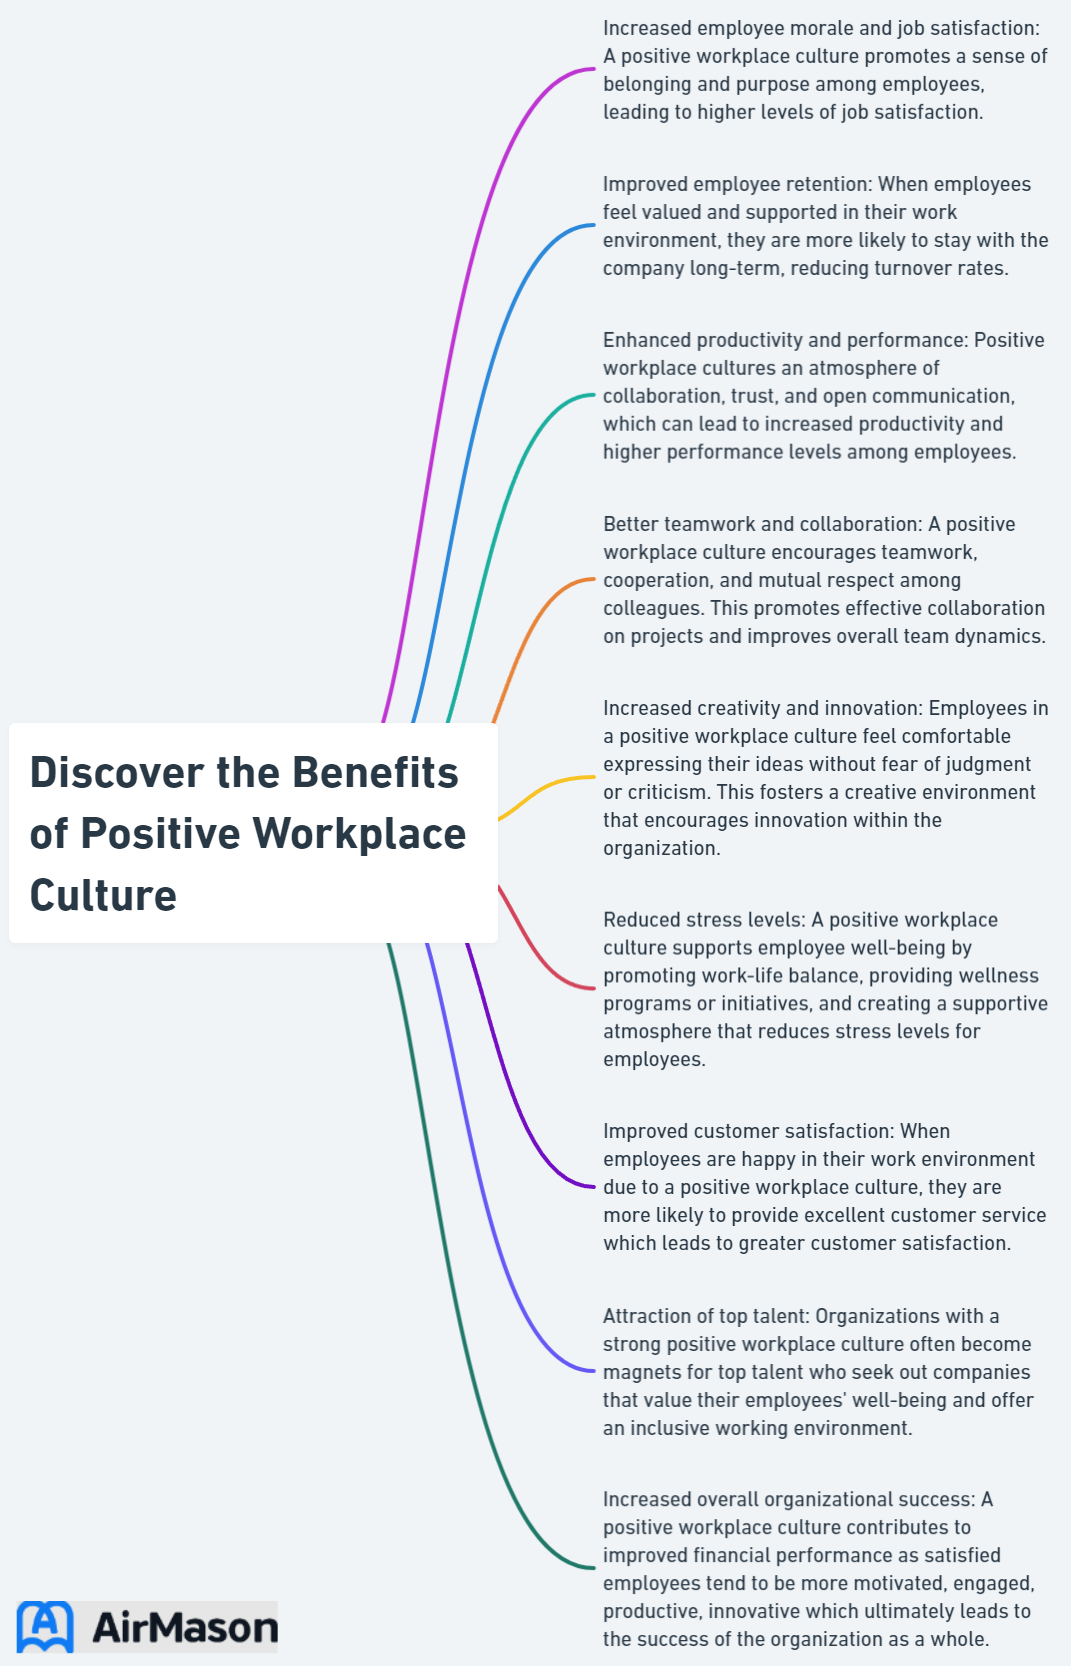 Discover the Benefits of Positive Workplace Culture